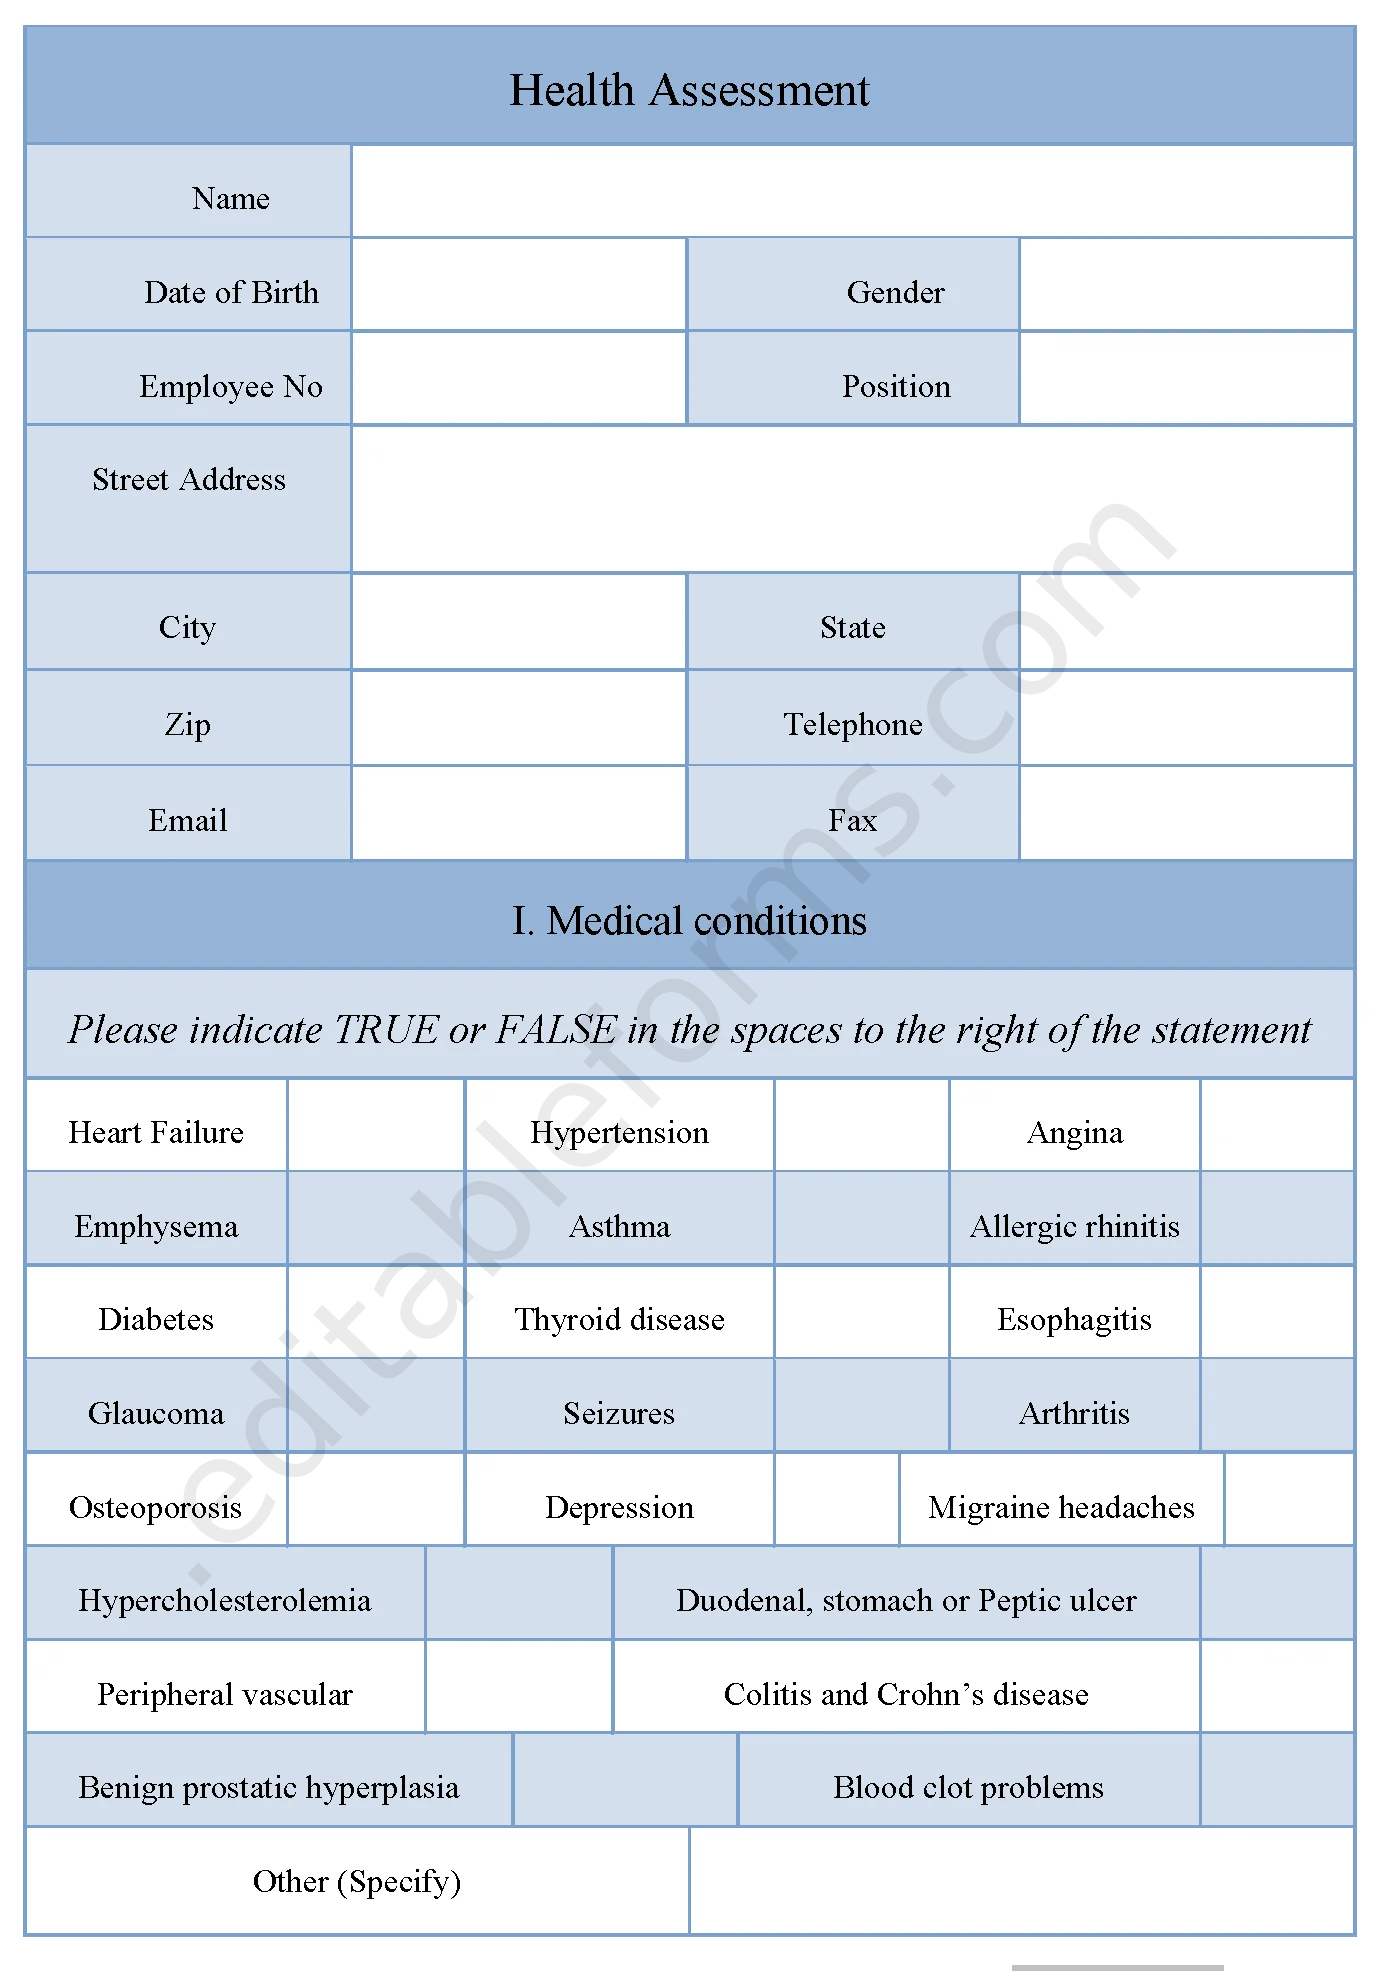 Health Assessment Fillable PDF Template